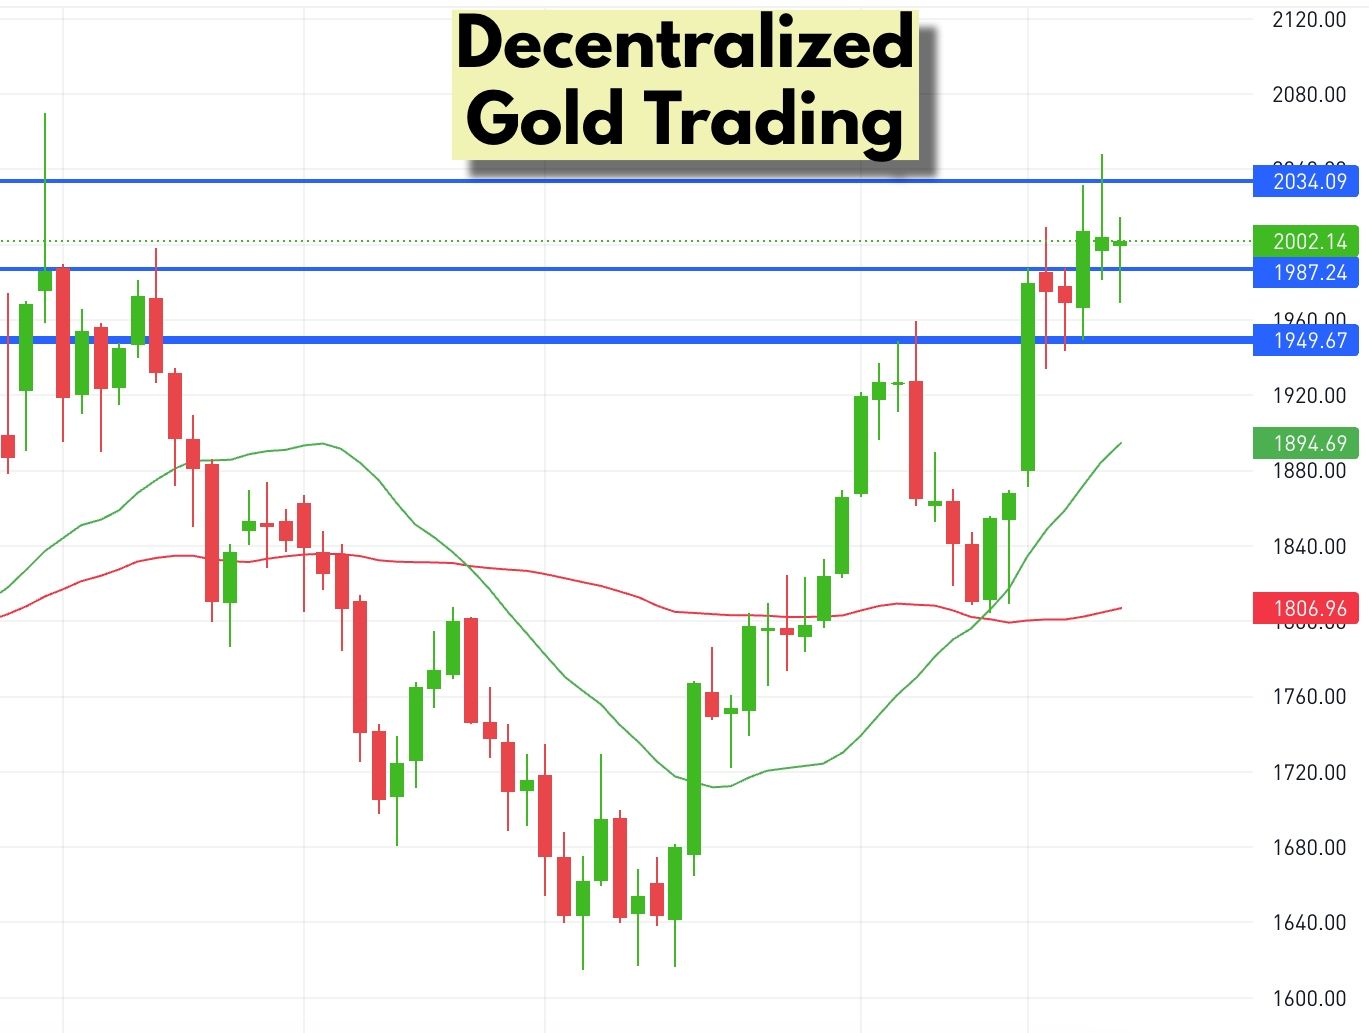 Decentralized Gold Trading